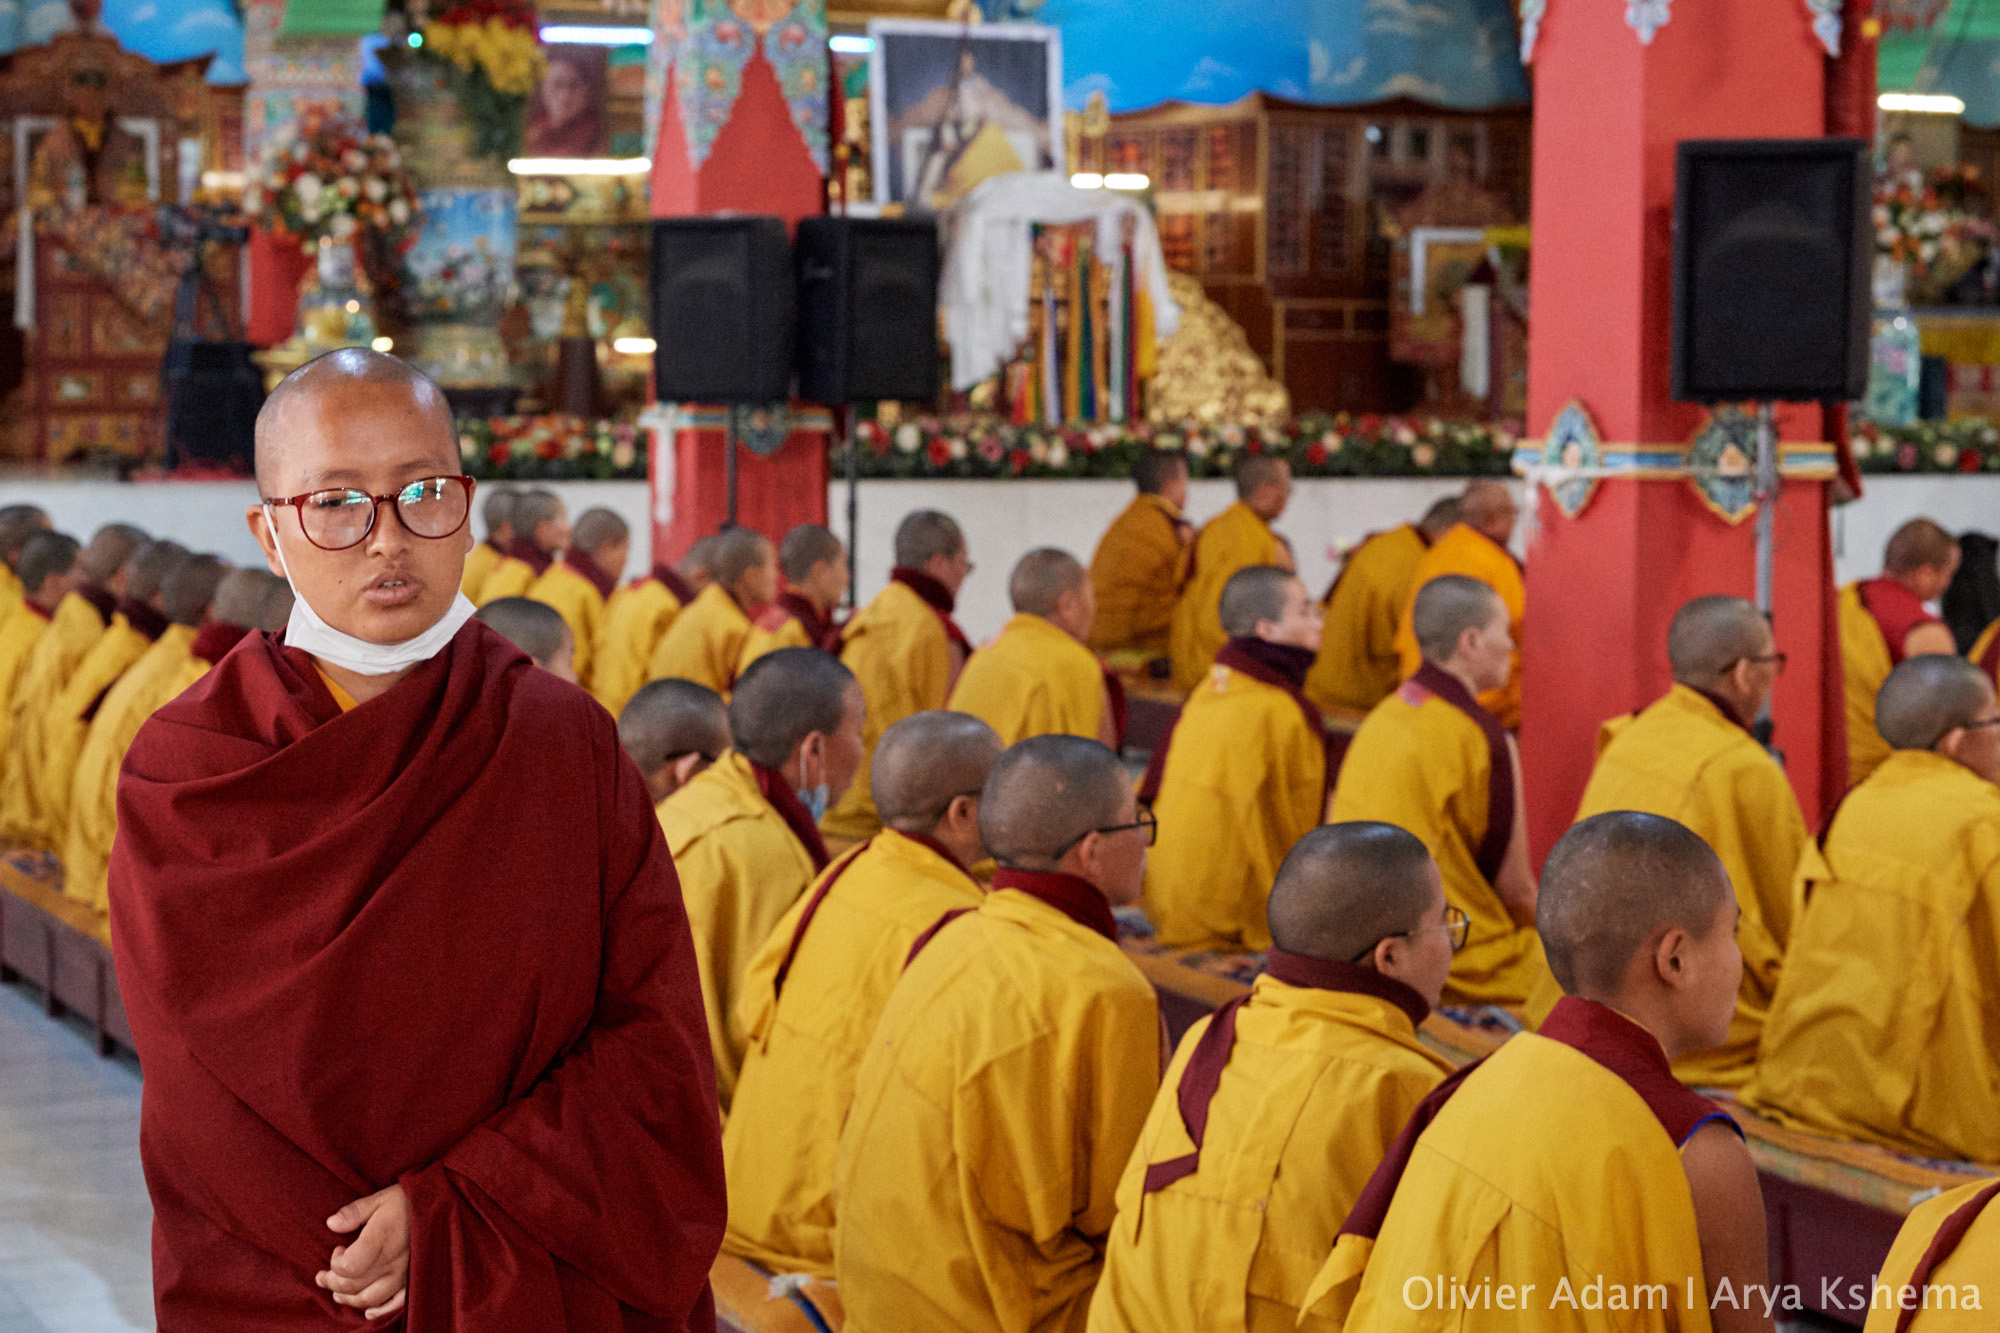 The Discipline of Benefitting Sentient Beings